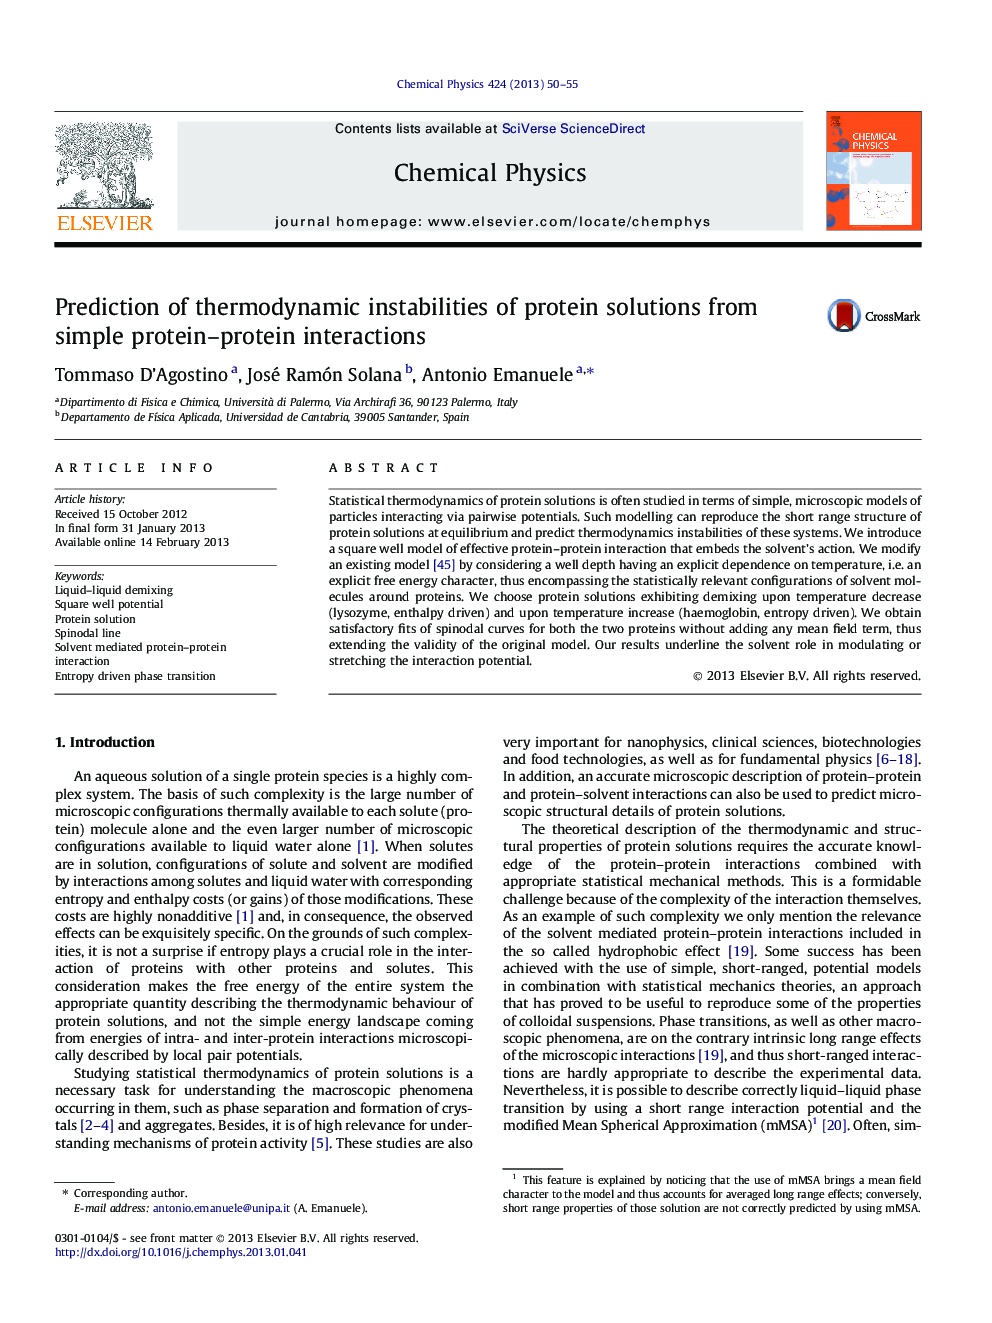 Prediction of thermodynamic instabilities of protein solutions from simple protein-protein interactions